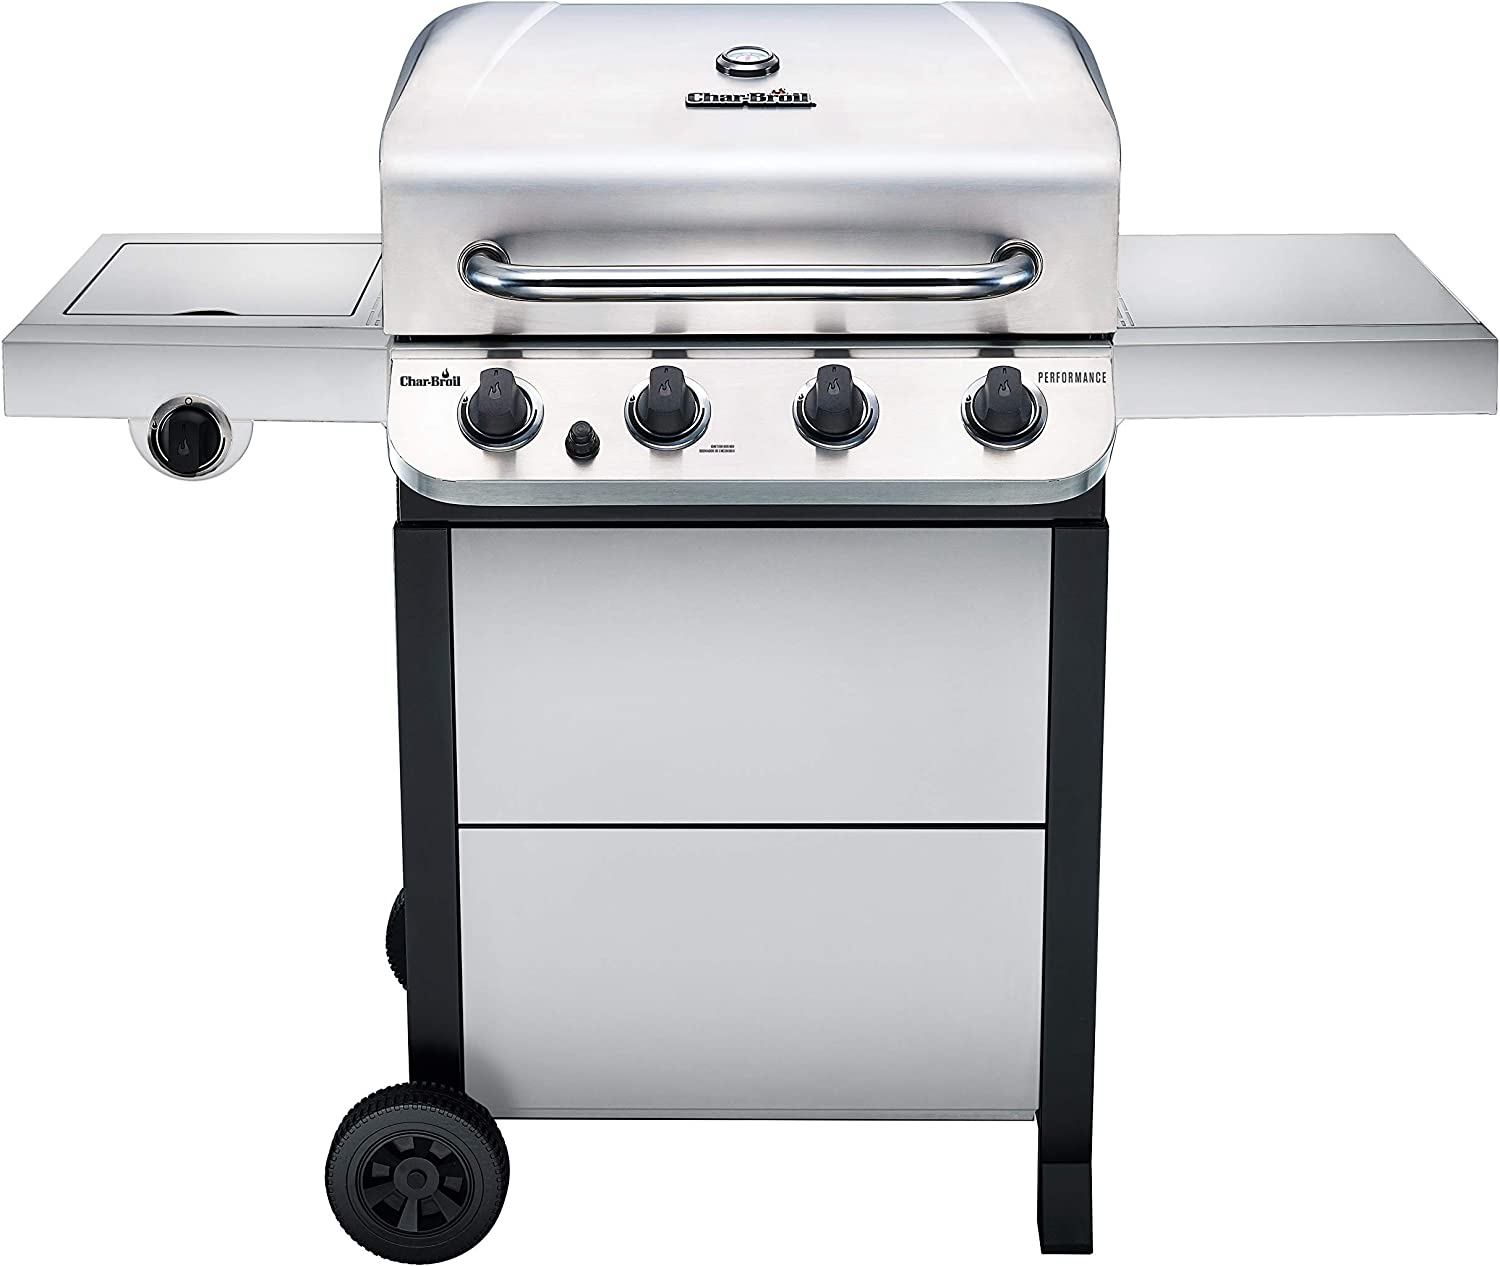 Char-Broil Signature Even Heat Rust Resistant BBQ Grill